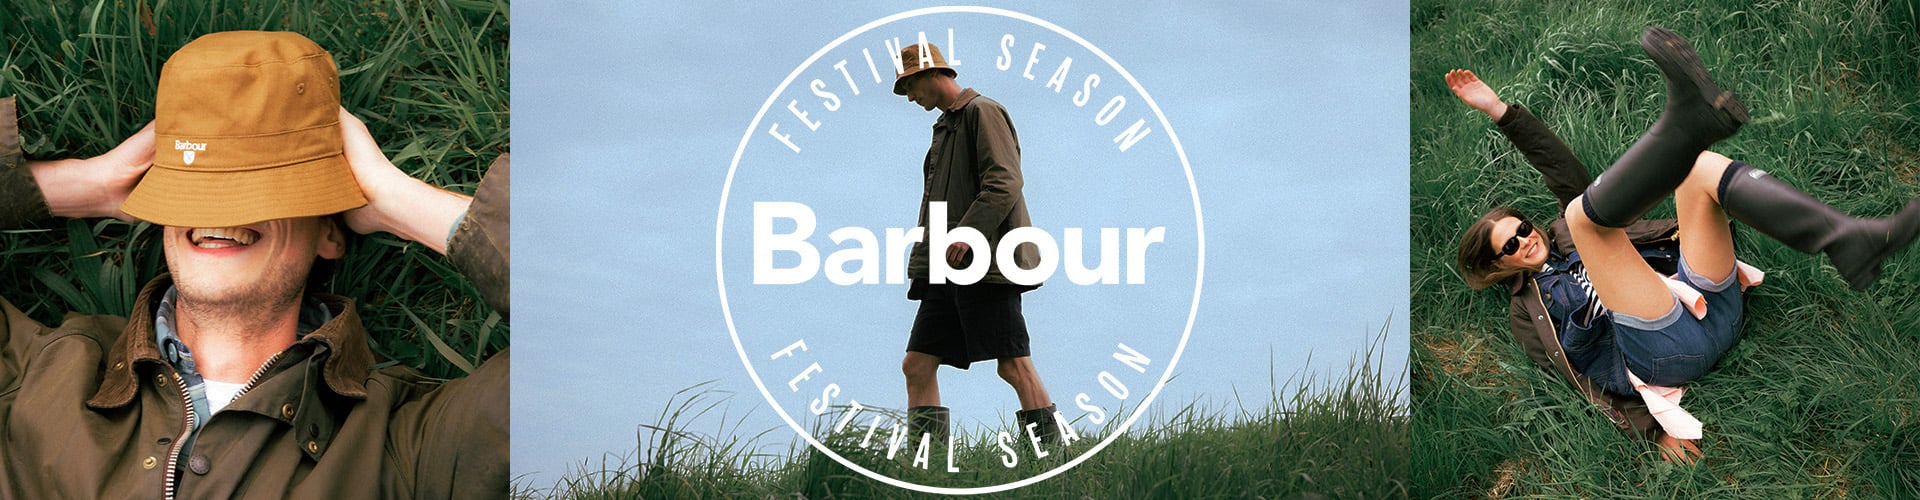 Festival outfit ideas from Barbour